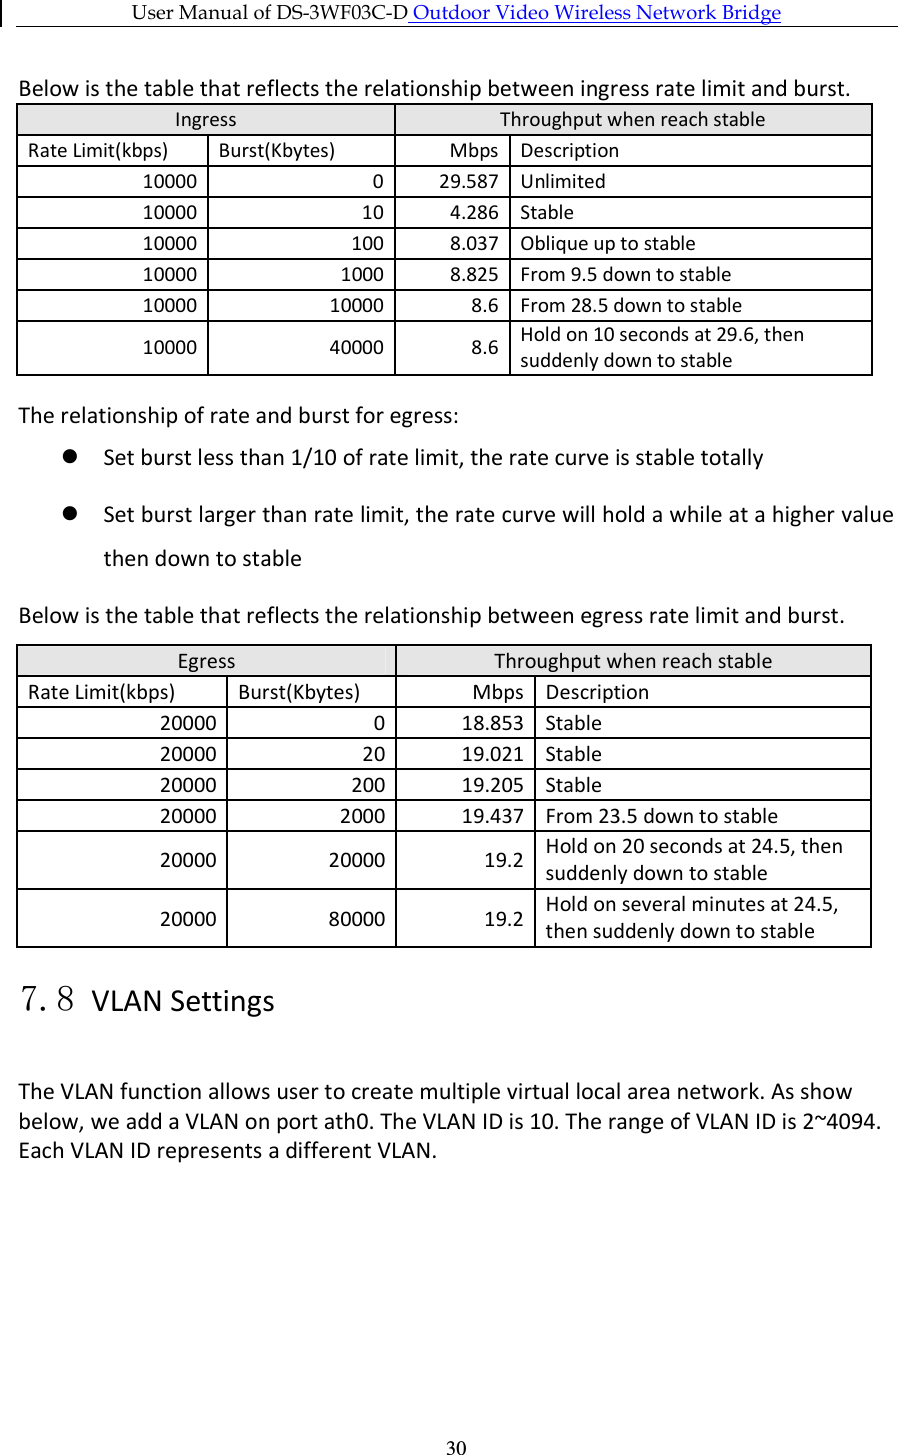 User Manual of DS-3WF03C-D Outdoor Video Wireless Network Bridge      30Below is the table that reflects the relationship between ingress rate limit and burst. Ingress  Throughput when reach stable Rate Limit(kbps)  Burst(Kbytes)  Mbps Description 10000 0 29.587 Unlimited 10000 10 4.286 Stable 10000 100 8.037 Oblique up to stable 10000 1000 8.825 From 9.5 down to stable 10000 10000 8.6 From 28.5 down to stable 10000 40000 8.6 Hold on 10 seconds at 29.6, then suddenly down to stable The relationship of rate and burst for egress:  Set burst less than 1/10 of rate limit, the rate curve is stable totally  Set burst larger than rate limit, the rate curve will hold a while at a higher value then down to stable Below is the table that reflects the relationship between egress rate limit and burst. Egress  Throughput when reach stable Rate Limit(kbps)  Burst(Kbytes)  Mbps Description 20000 0 18.853 Stable 20000 20 19.021 Stable 20000 200 19.205 Stable 20000 2000 19.437 From 23.5 down to stable 20000 20000 19.2 Hold on 20 seconds at 24.5, then suddenly down to stable 20000 80000 19.2 Hold on several minutes at 24.5, then suddenly down to stable 7.8 VLAN Settings The VLAN function allows user to create multiple virtual local area network. As show below, we add a VLAN on port ath0. The VLAN ID is 10. The range of VLAN ID is 2~4094. Each VLAN ID represents a different VLAN. 